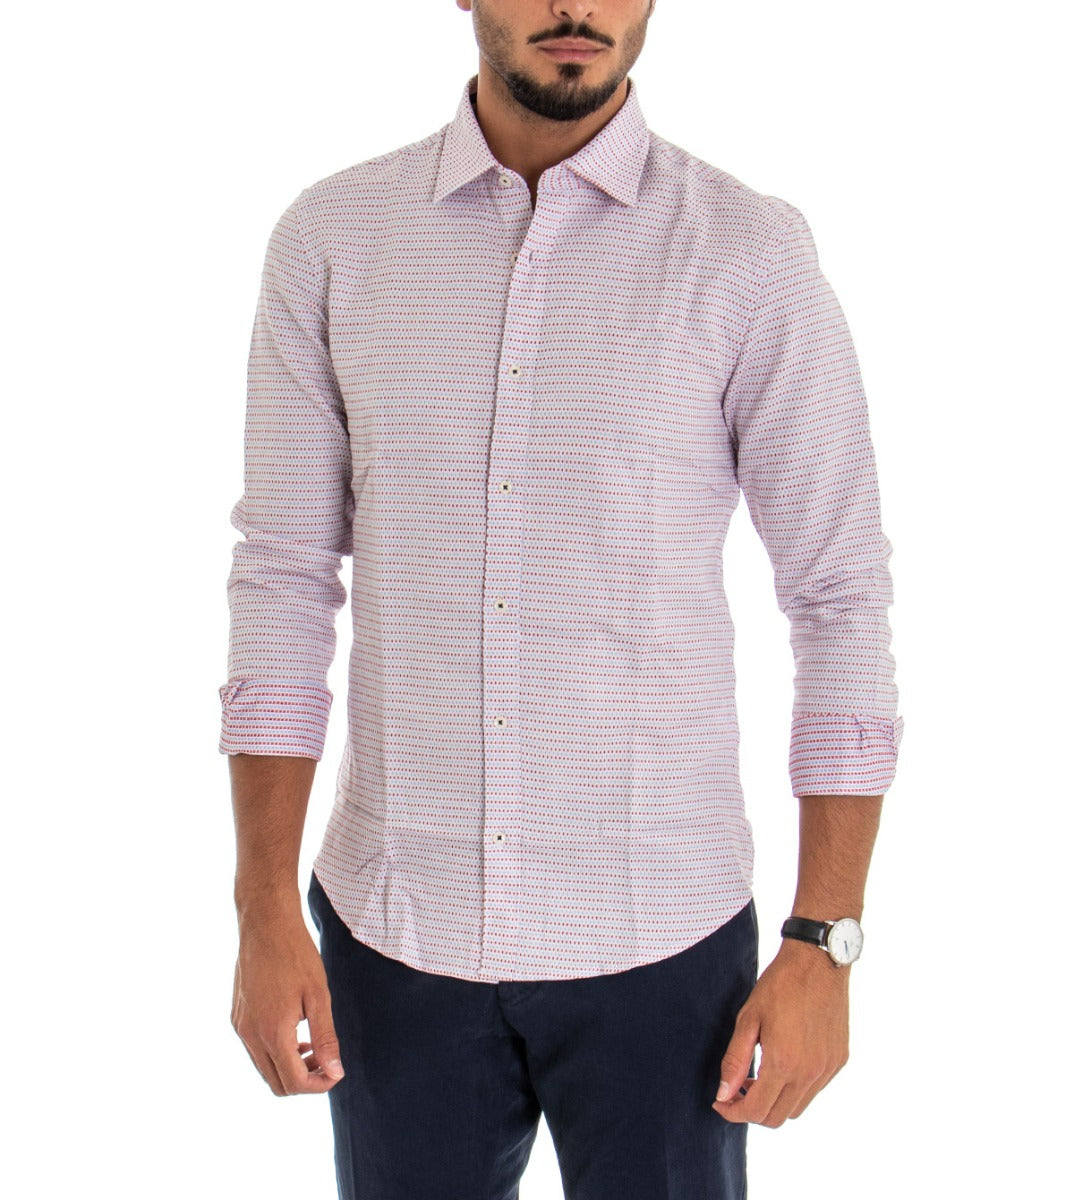 Men's Shirt With Collar Long Sleeve Slim Fit Casual Cotton White GIOSAL-C1803A